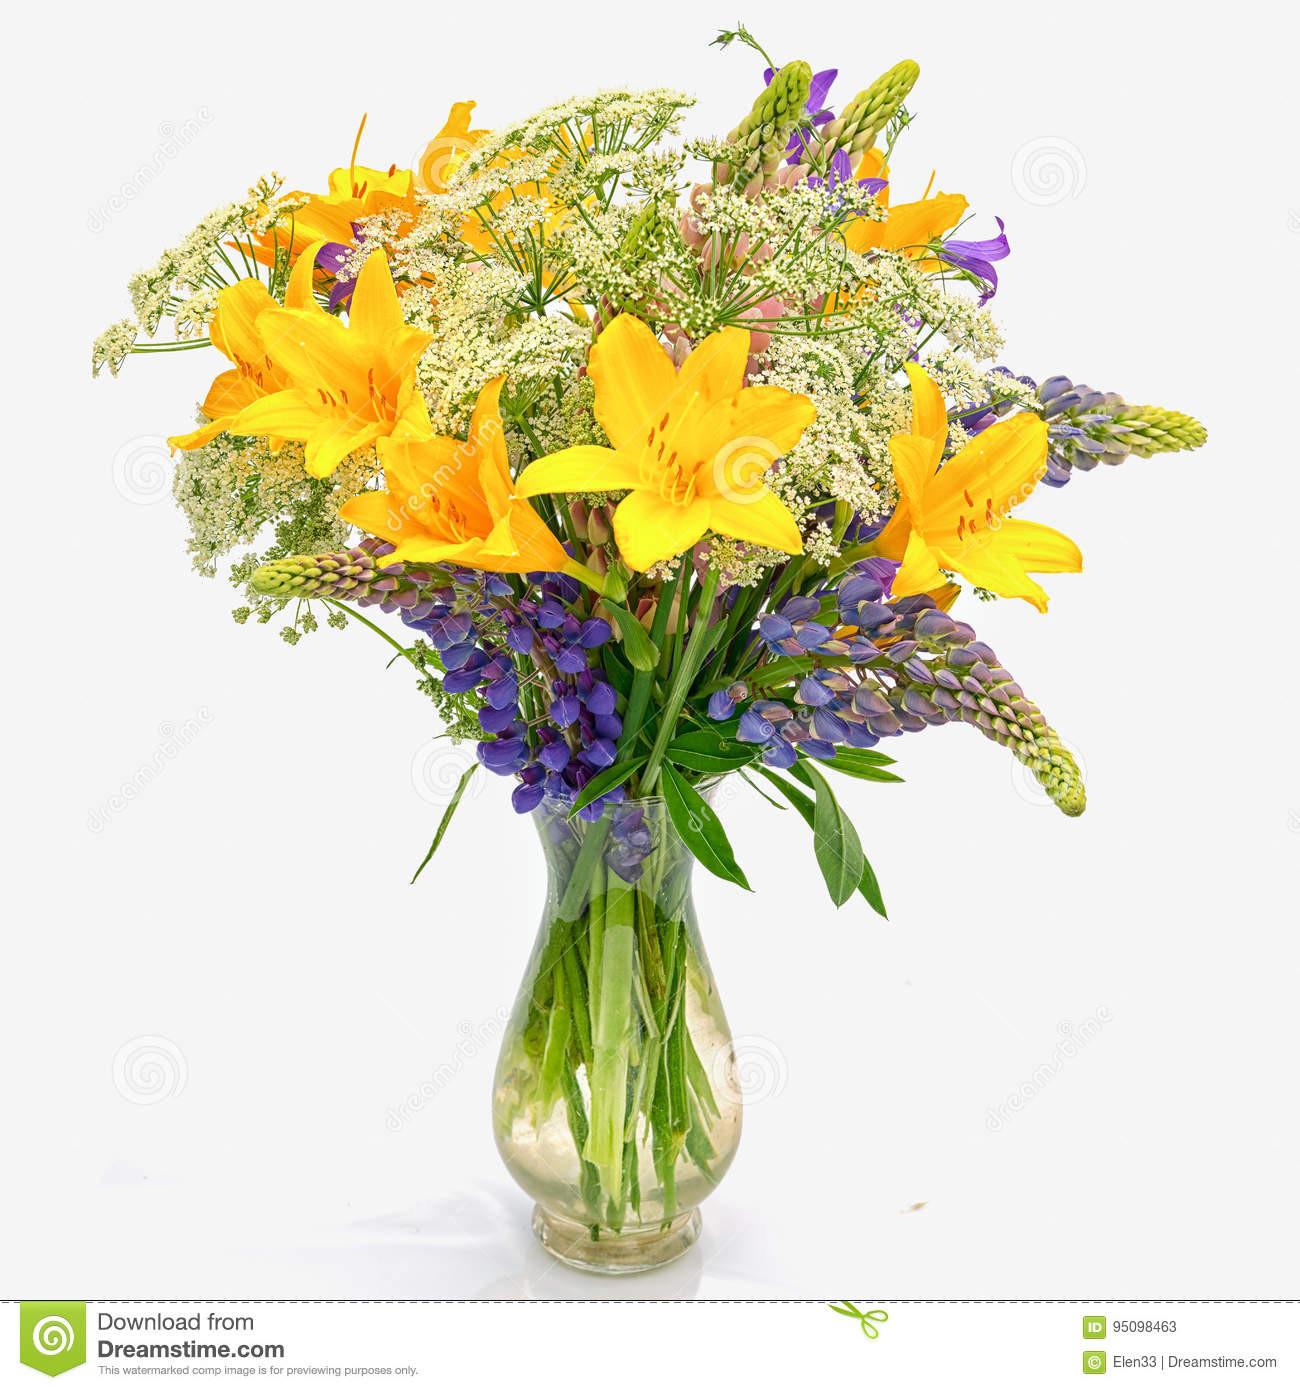 10 Stylish Cut Glass Flower Vase 2024 free download cut glass flower vase of bouquet stock image image of bouquet beauty lily blossom 95098463 intended for bouquet od wild flowers achillea millefolium day lily and lupine in a transparent glas